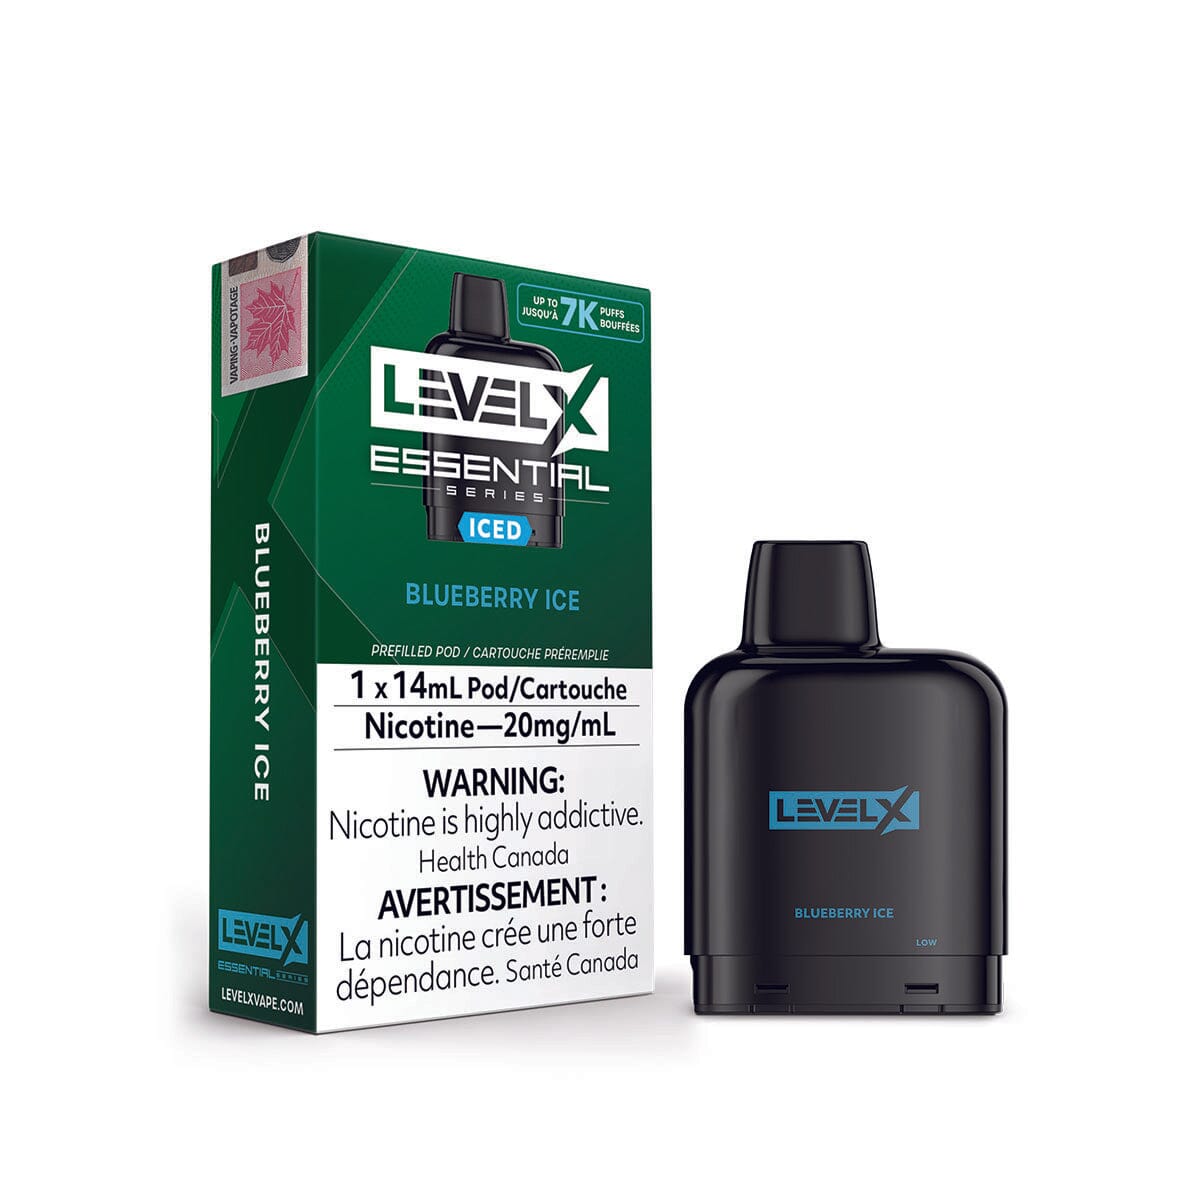 Level X Essential Series Blueberry Ice Disposable Vape Pod Disposable Level X 